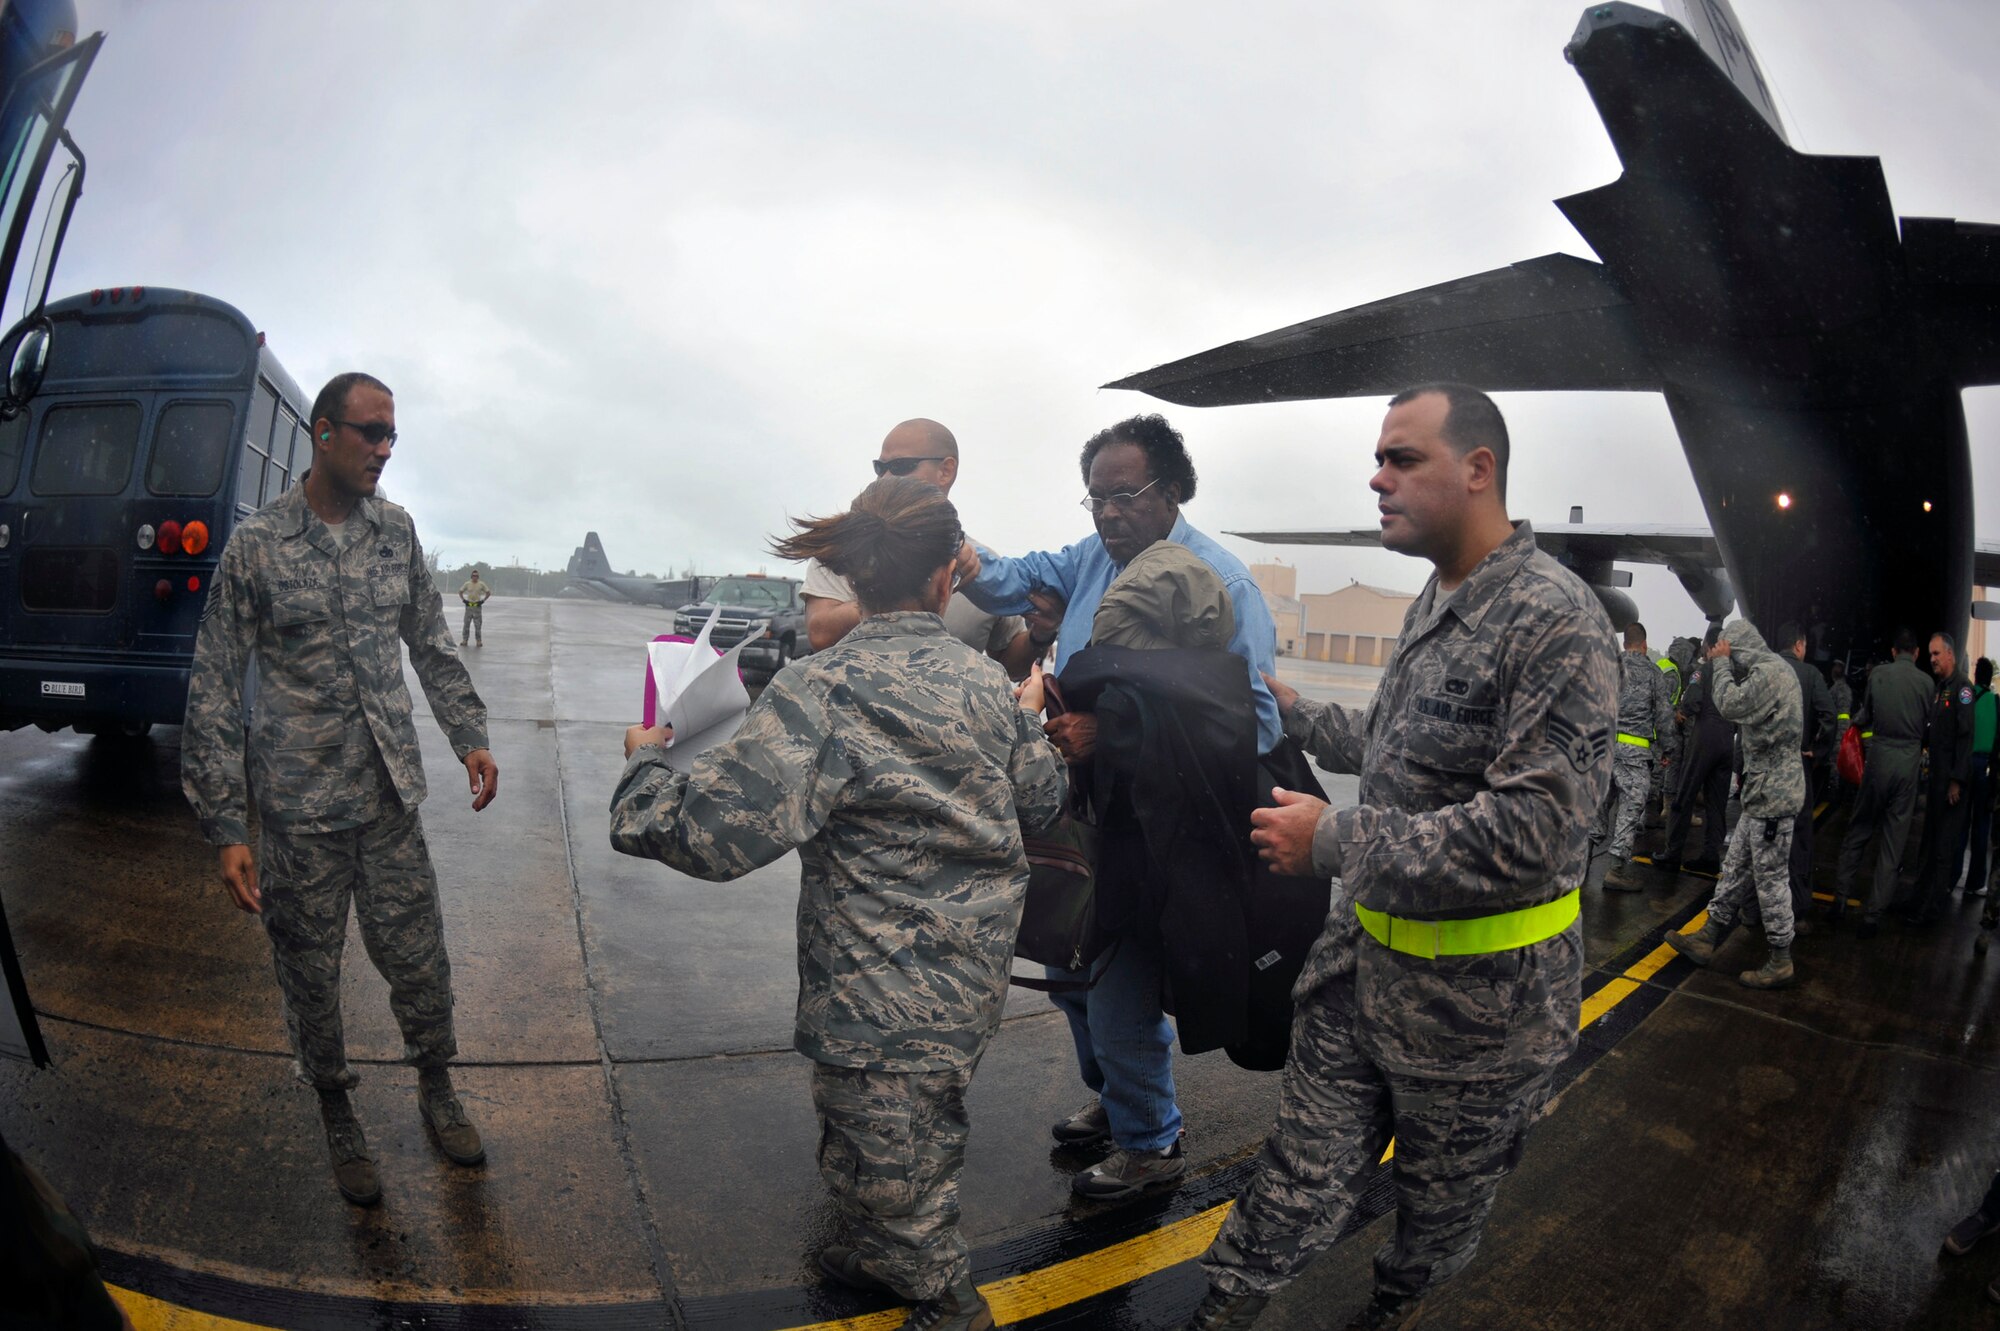 Airmen from the Puerto Rico Air National Guard’s 156th Airlift Wing assist U.S. citizens after being transported by a C-130E Hercules aircraft Jan. 17, that landed in San Juan, Puerto Rico. The American citizens were evacuated from Haiti where Airmen are playing an active role in support of the relief effort there in the aftermath of a devastating earthquake. (U.S. Air Force photo/Staff Sgt. Desiree N. Palacios)